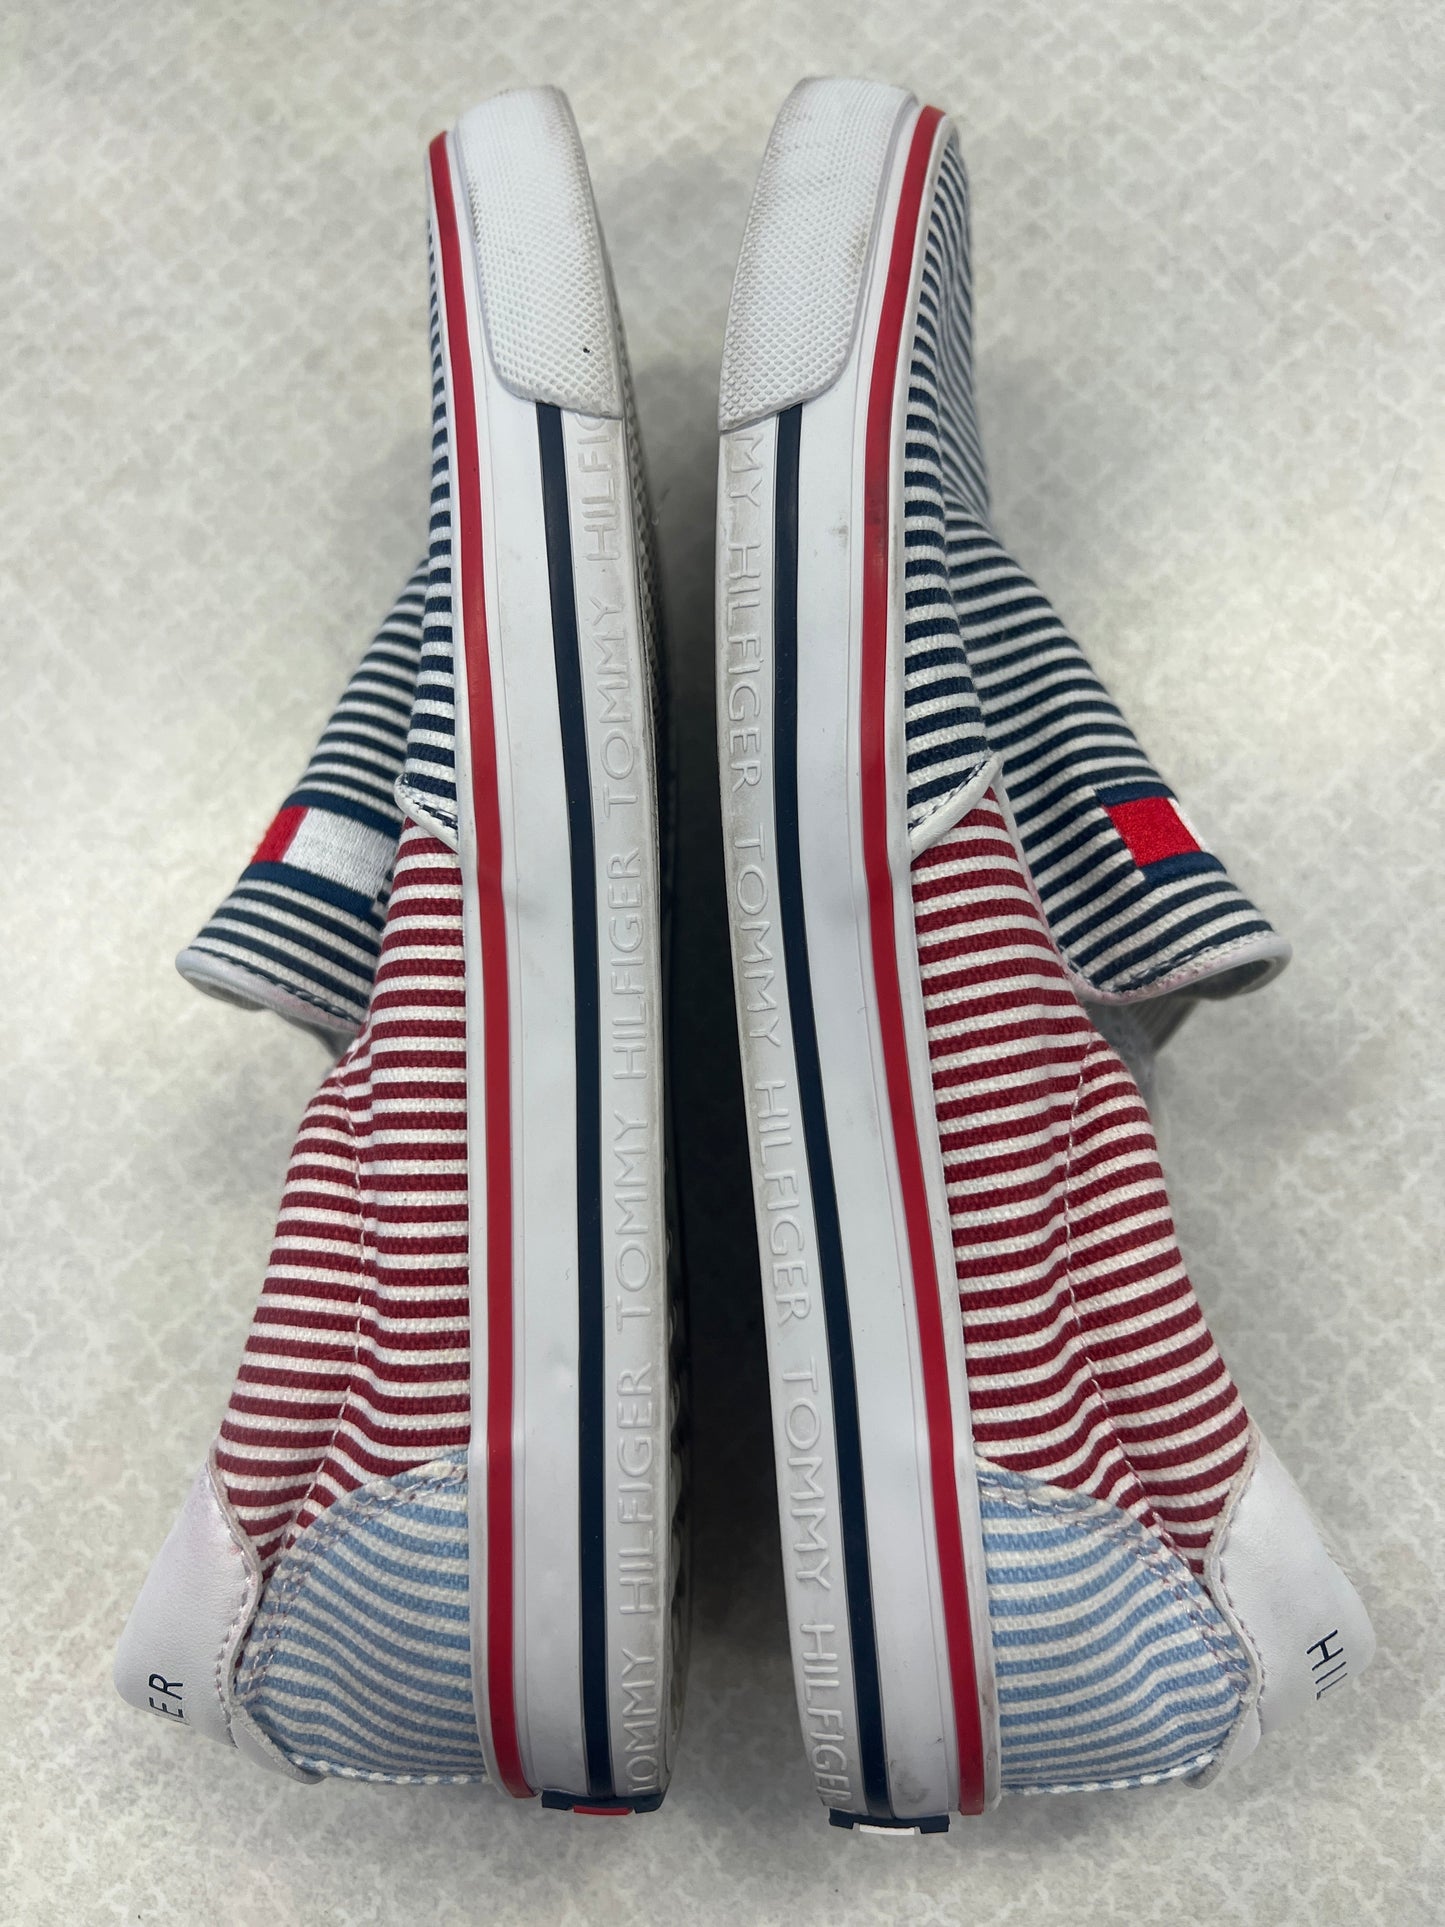 Shoes Sneakers By Tommy Hilfiger  Size: 6